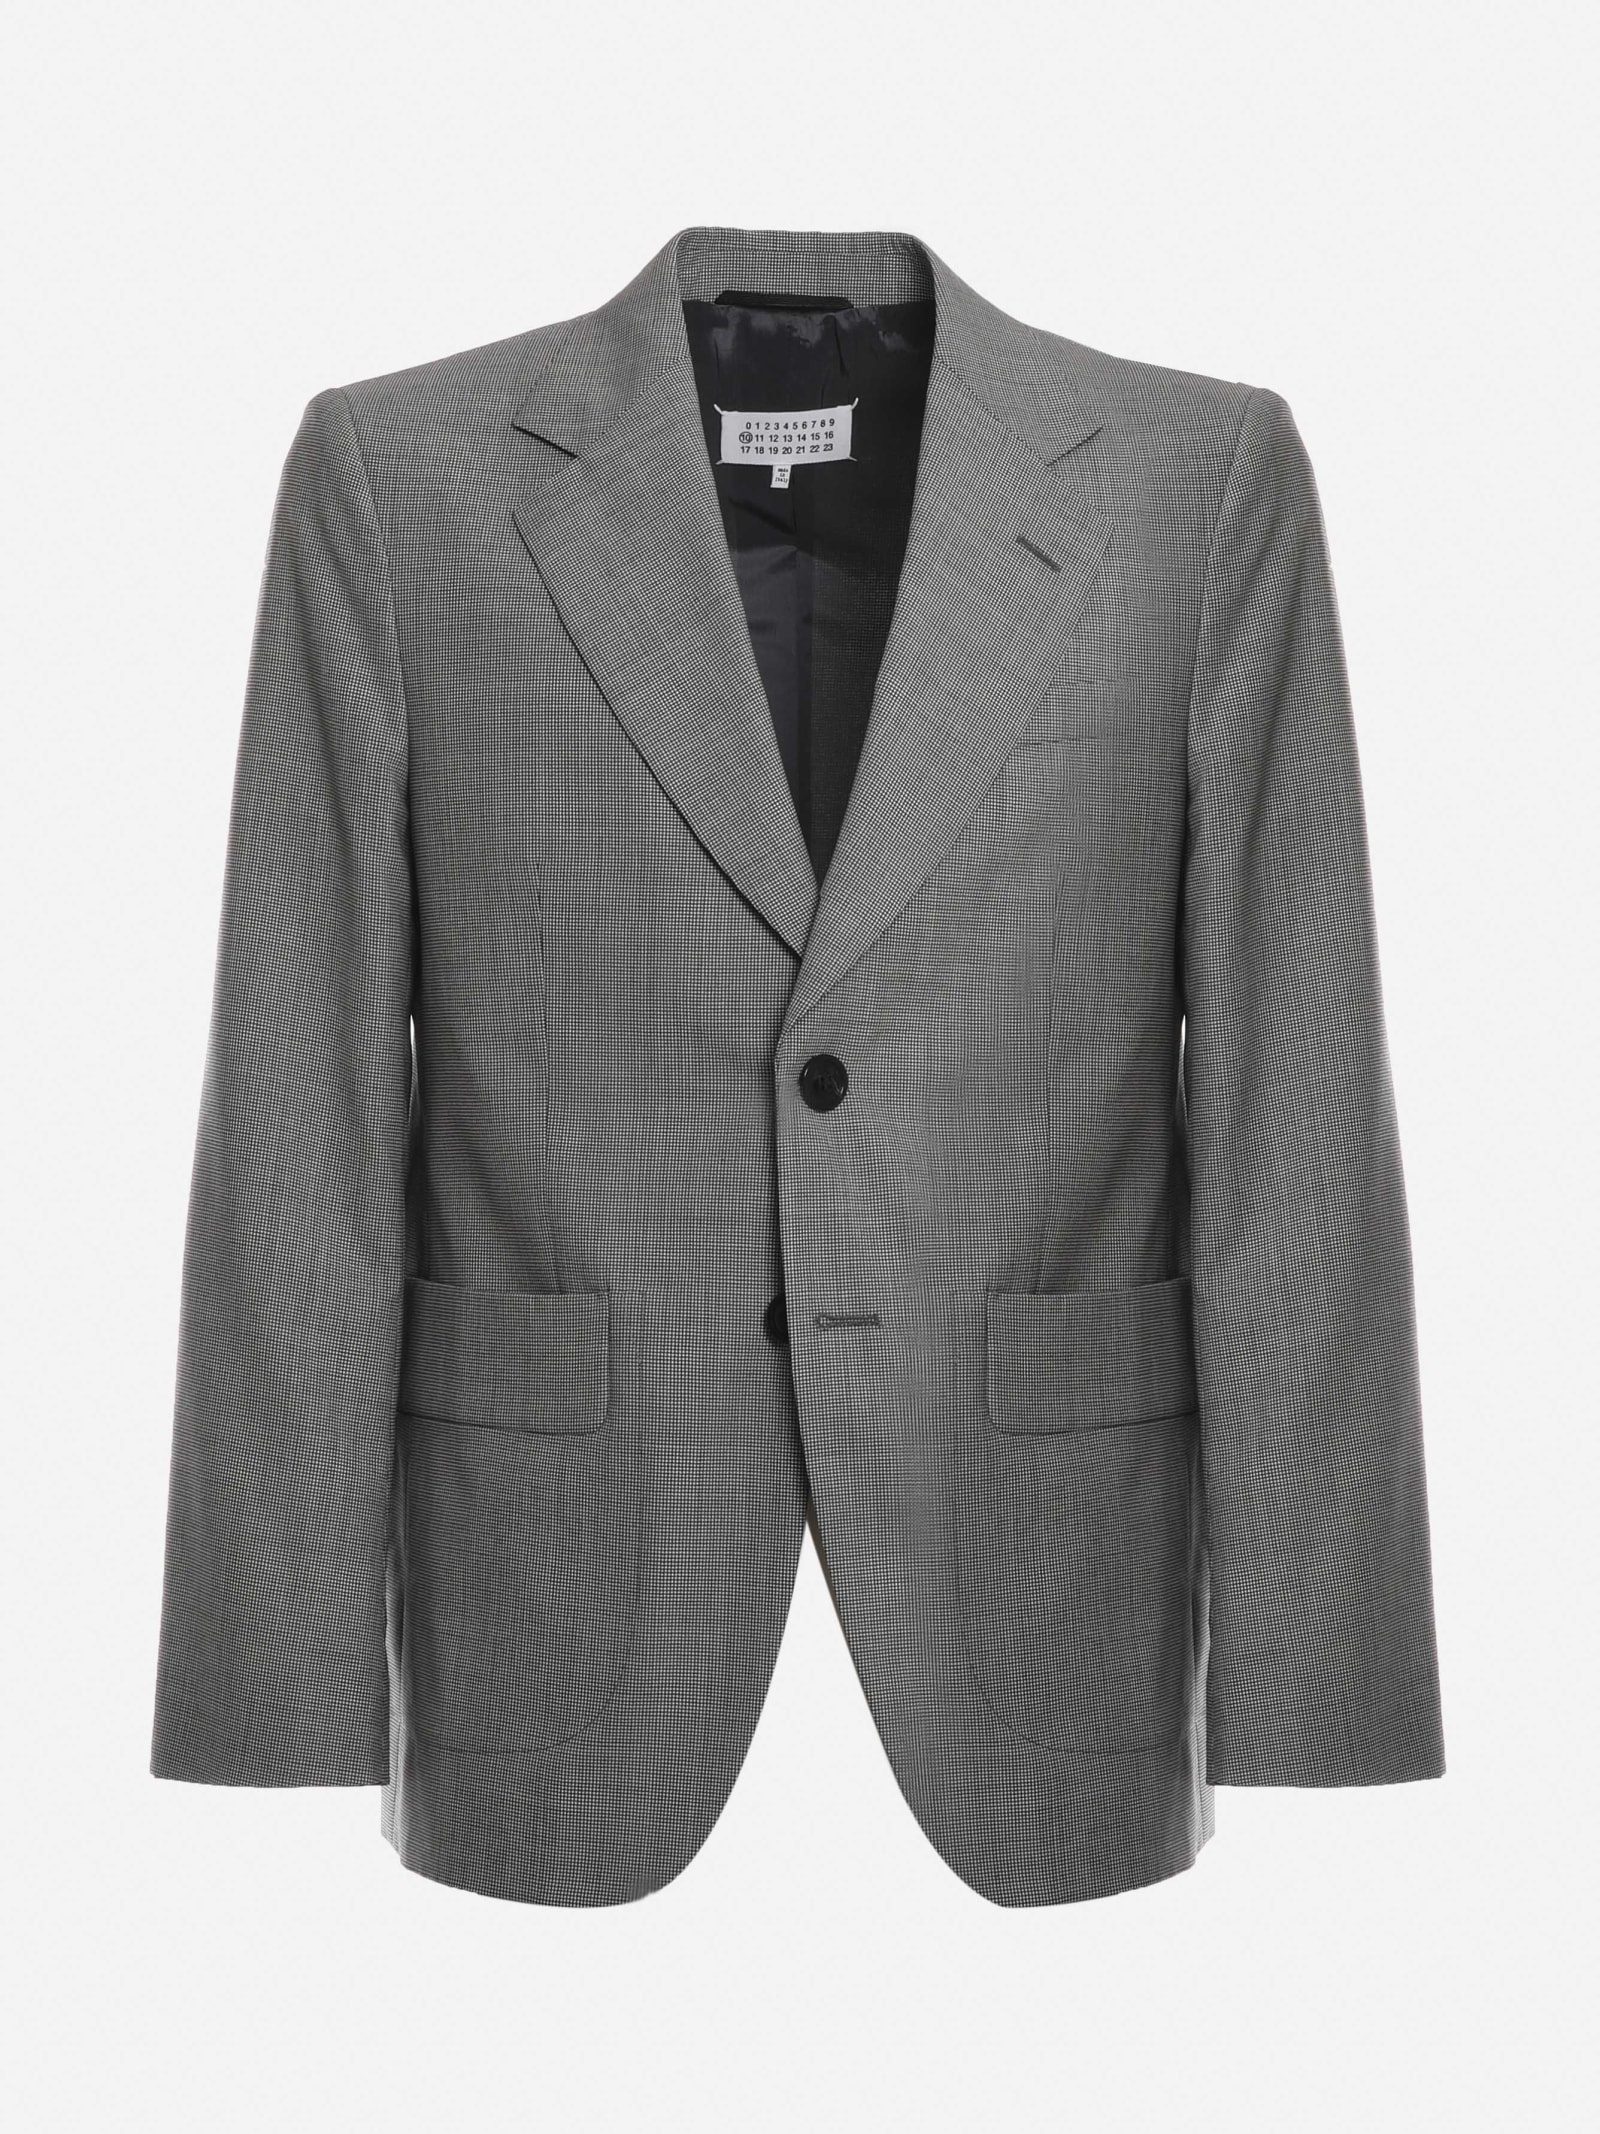 Maison Margiela Suit In Mini Houndstooth Made Of Wool